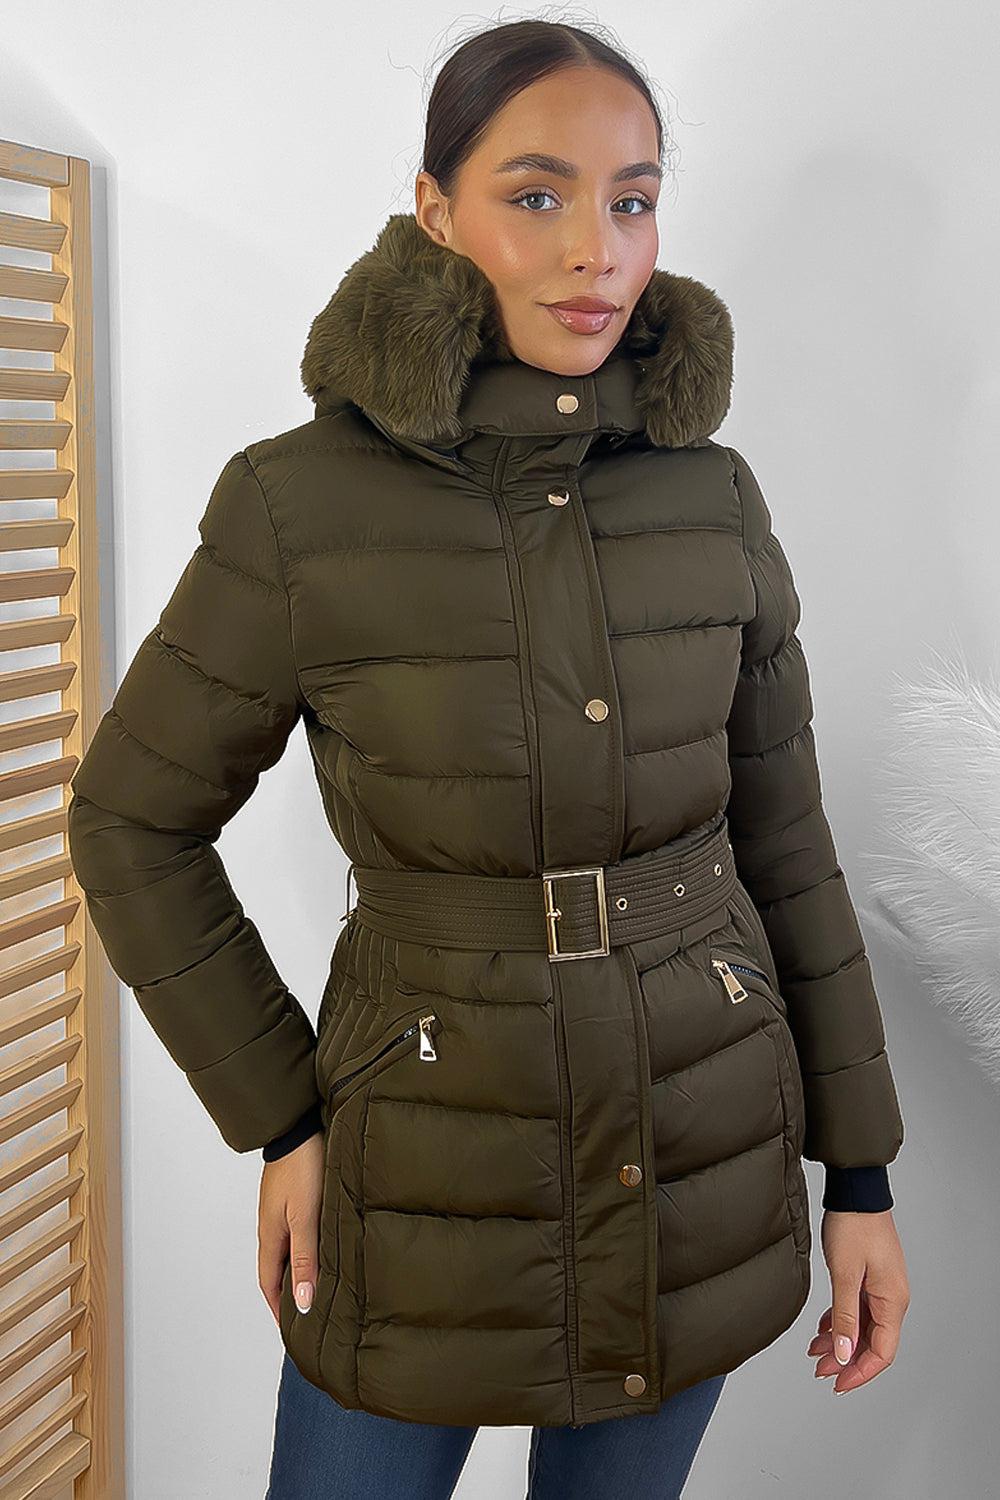 Gold Hardware Belted And Hooded Winter Jacket-SinglePrice